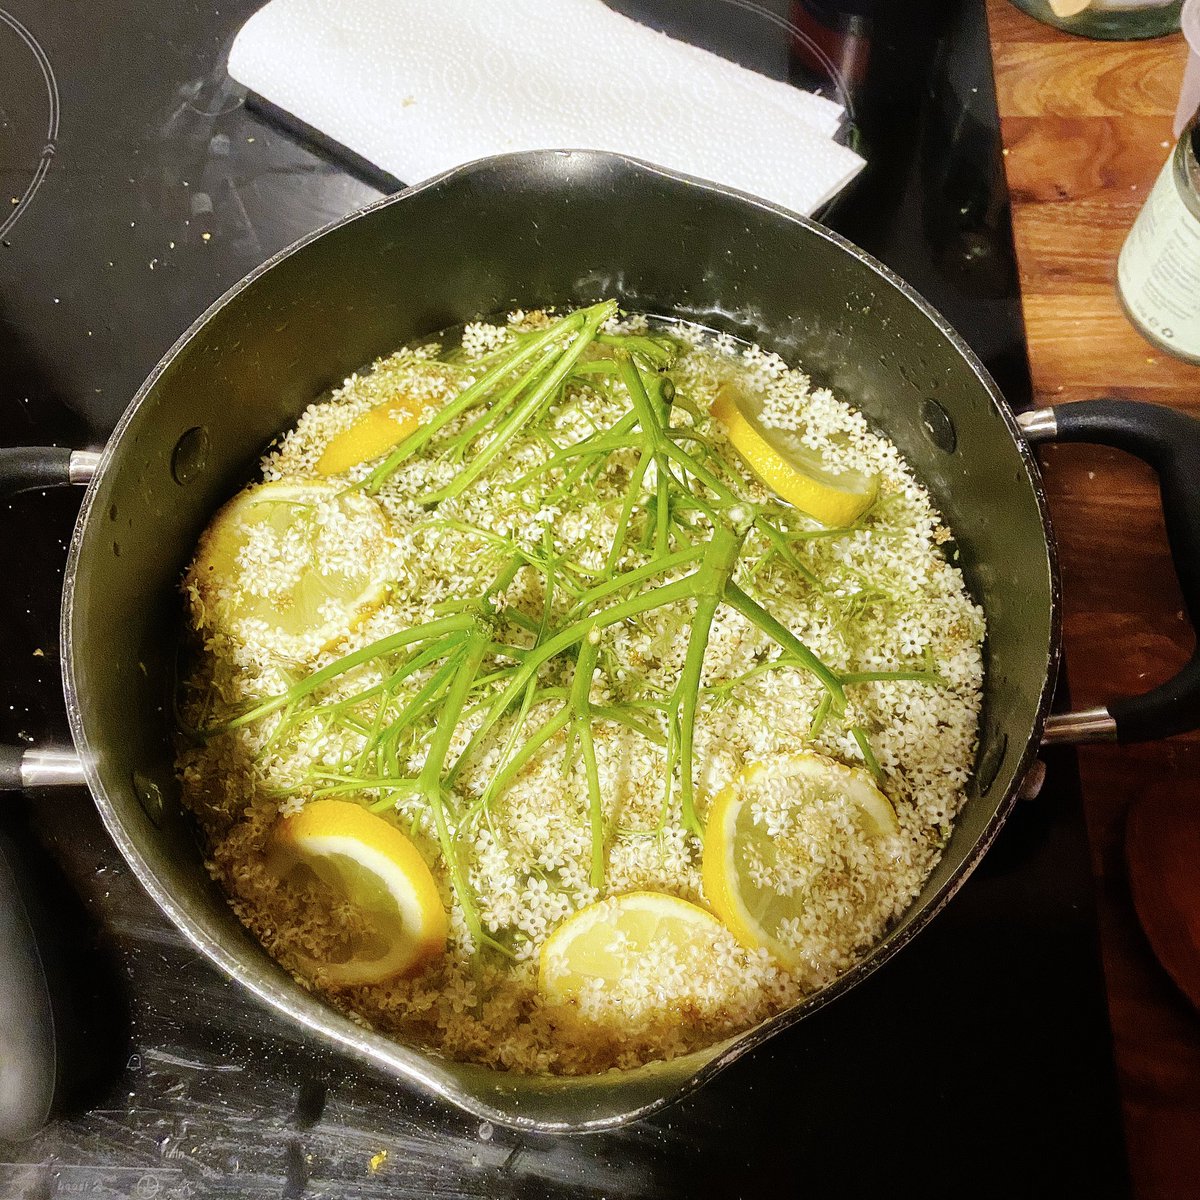 Making elderflower cordial!(Although that might only make me smile so much because of this post...  https://theotherlivvy.com/2020/05/24/sinful-sunday-elderflowers/)